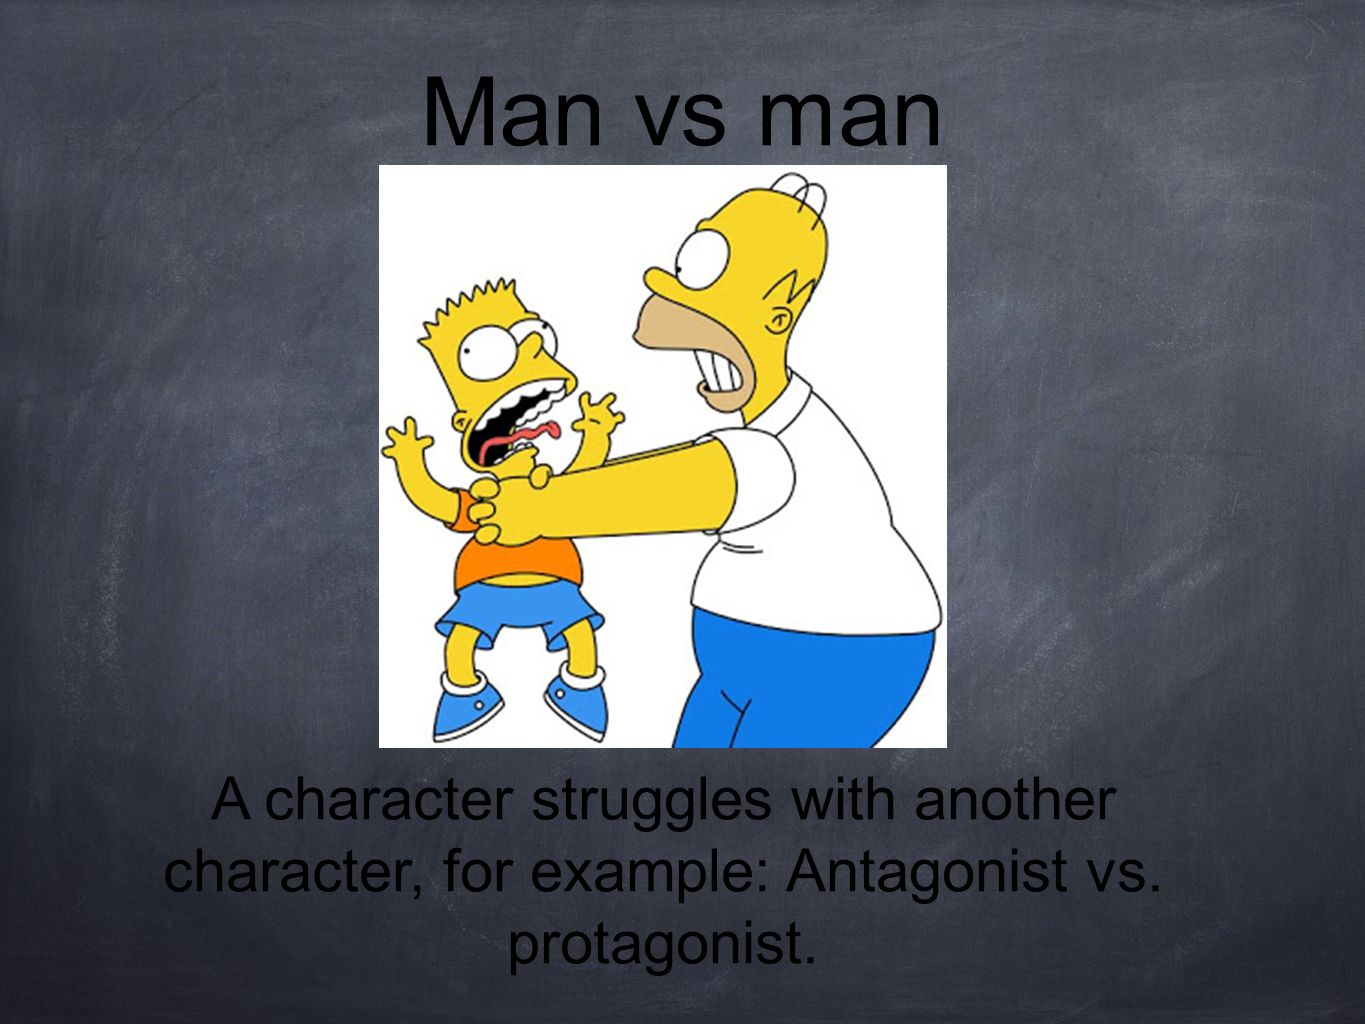 Man vs man A character struggles with another character, for example: Antagonist vs. protagonist.